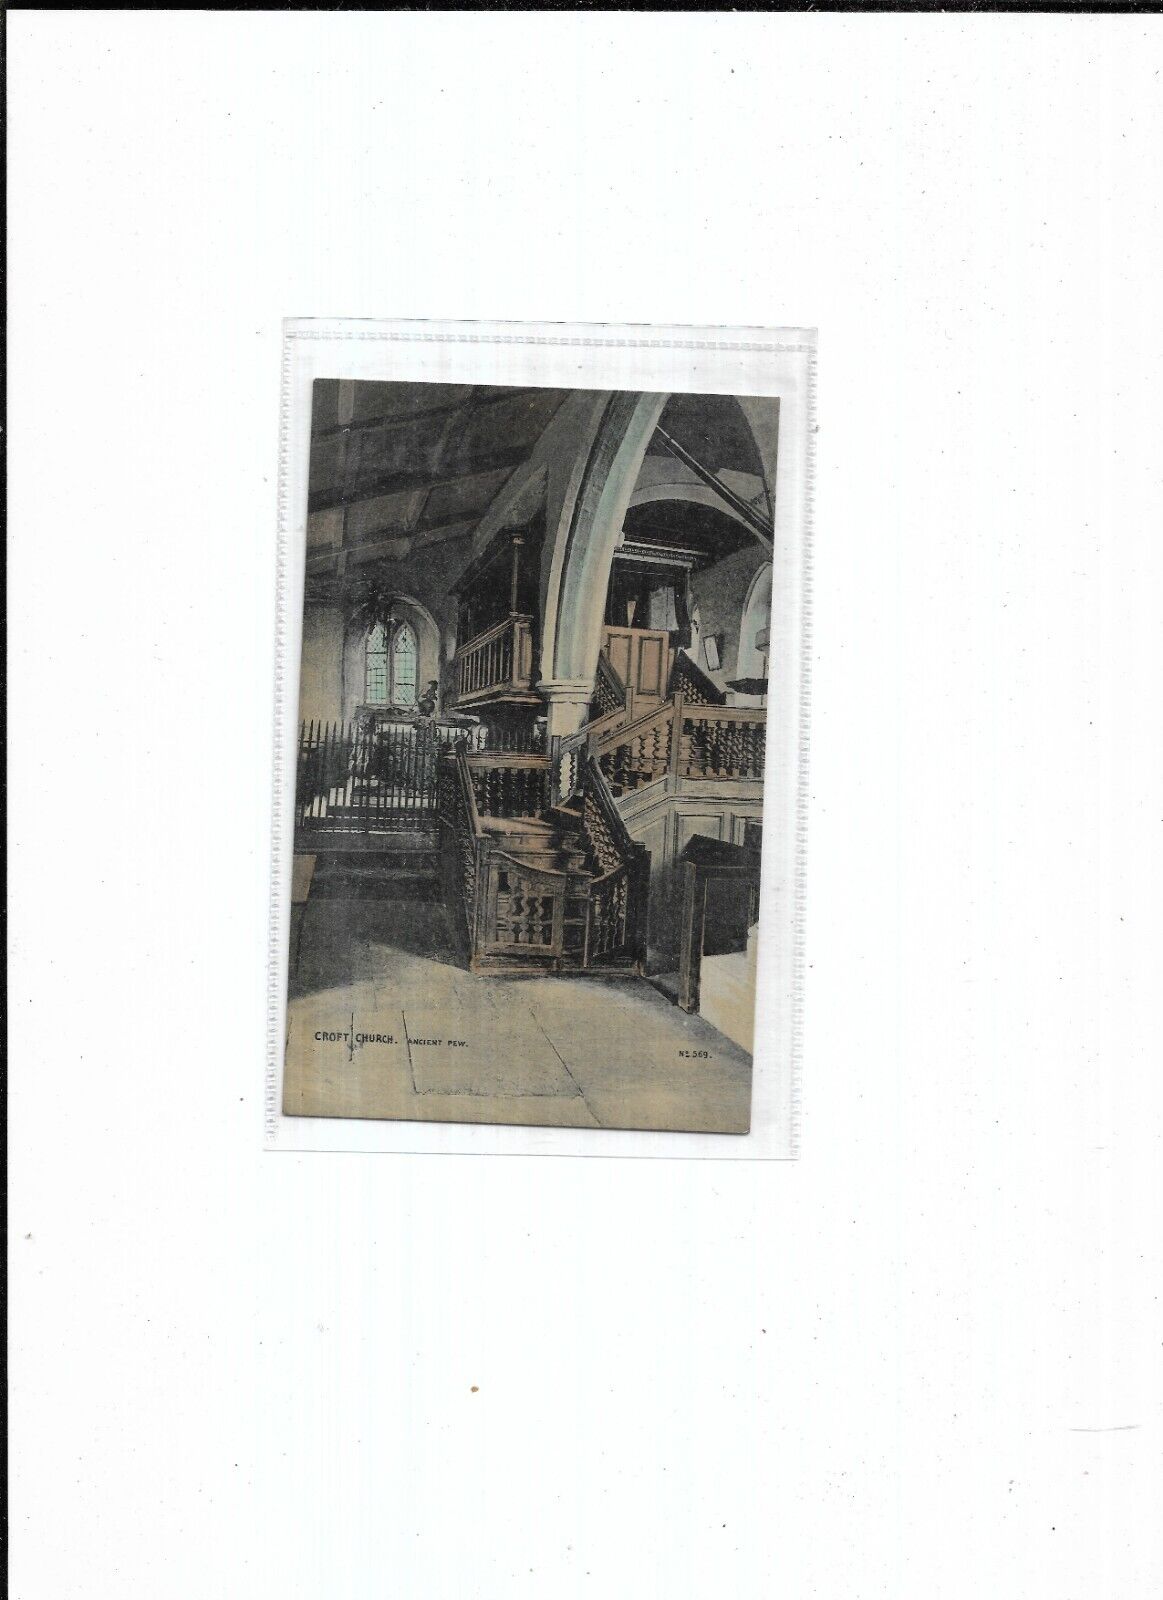 House Clearance - Co Durham Service No.569 "Croft Church. Ancient Pew" Postmarked 1911